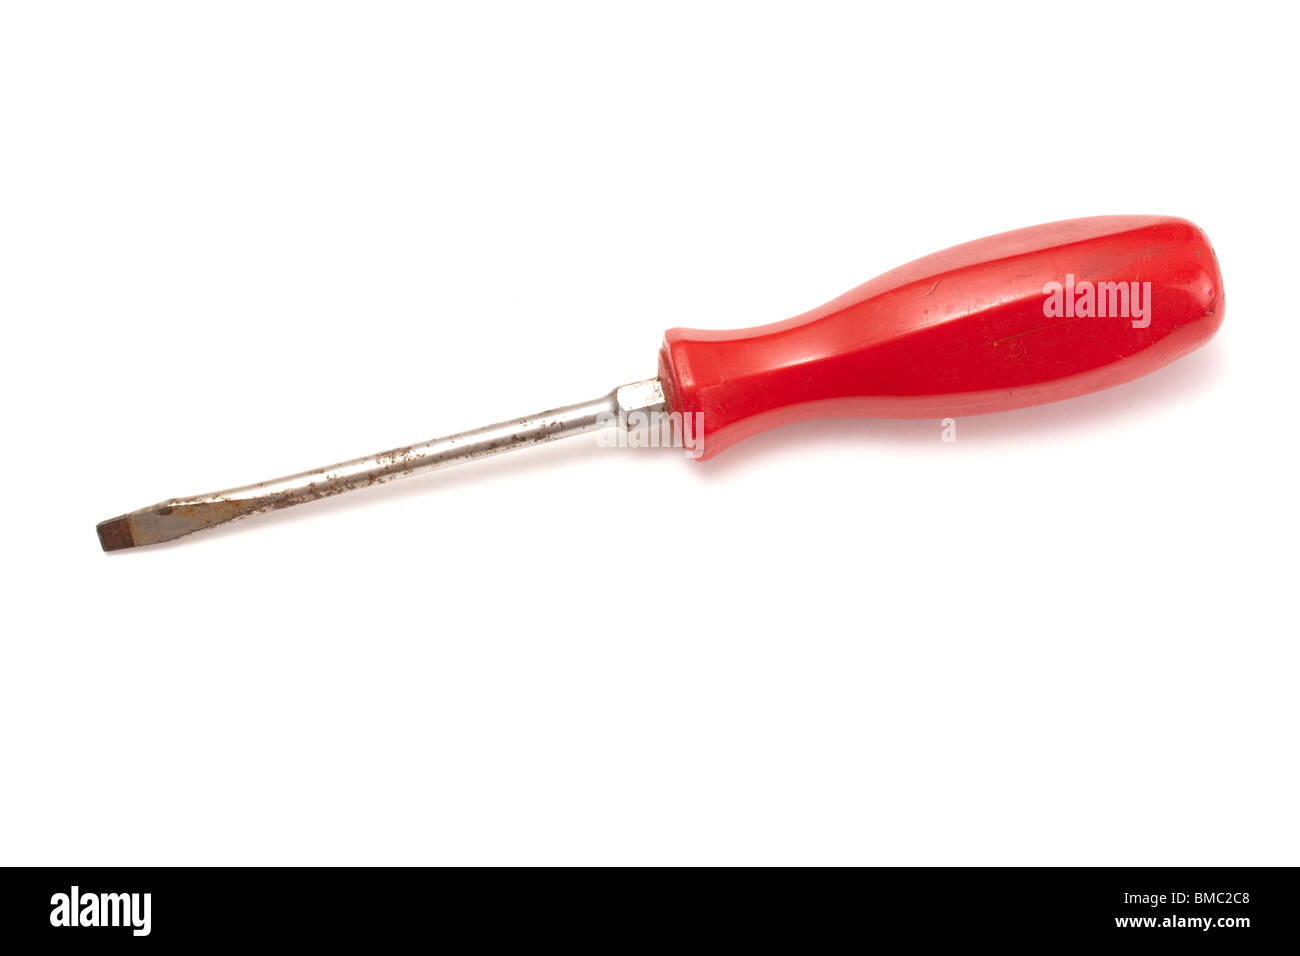 A screwdriver on white background Stock Photo